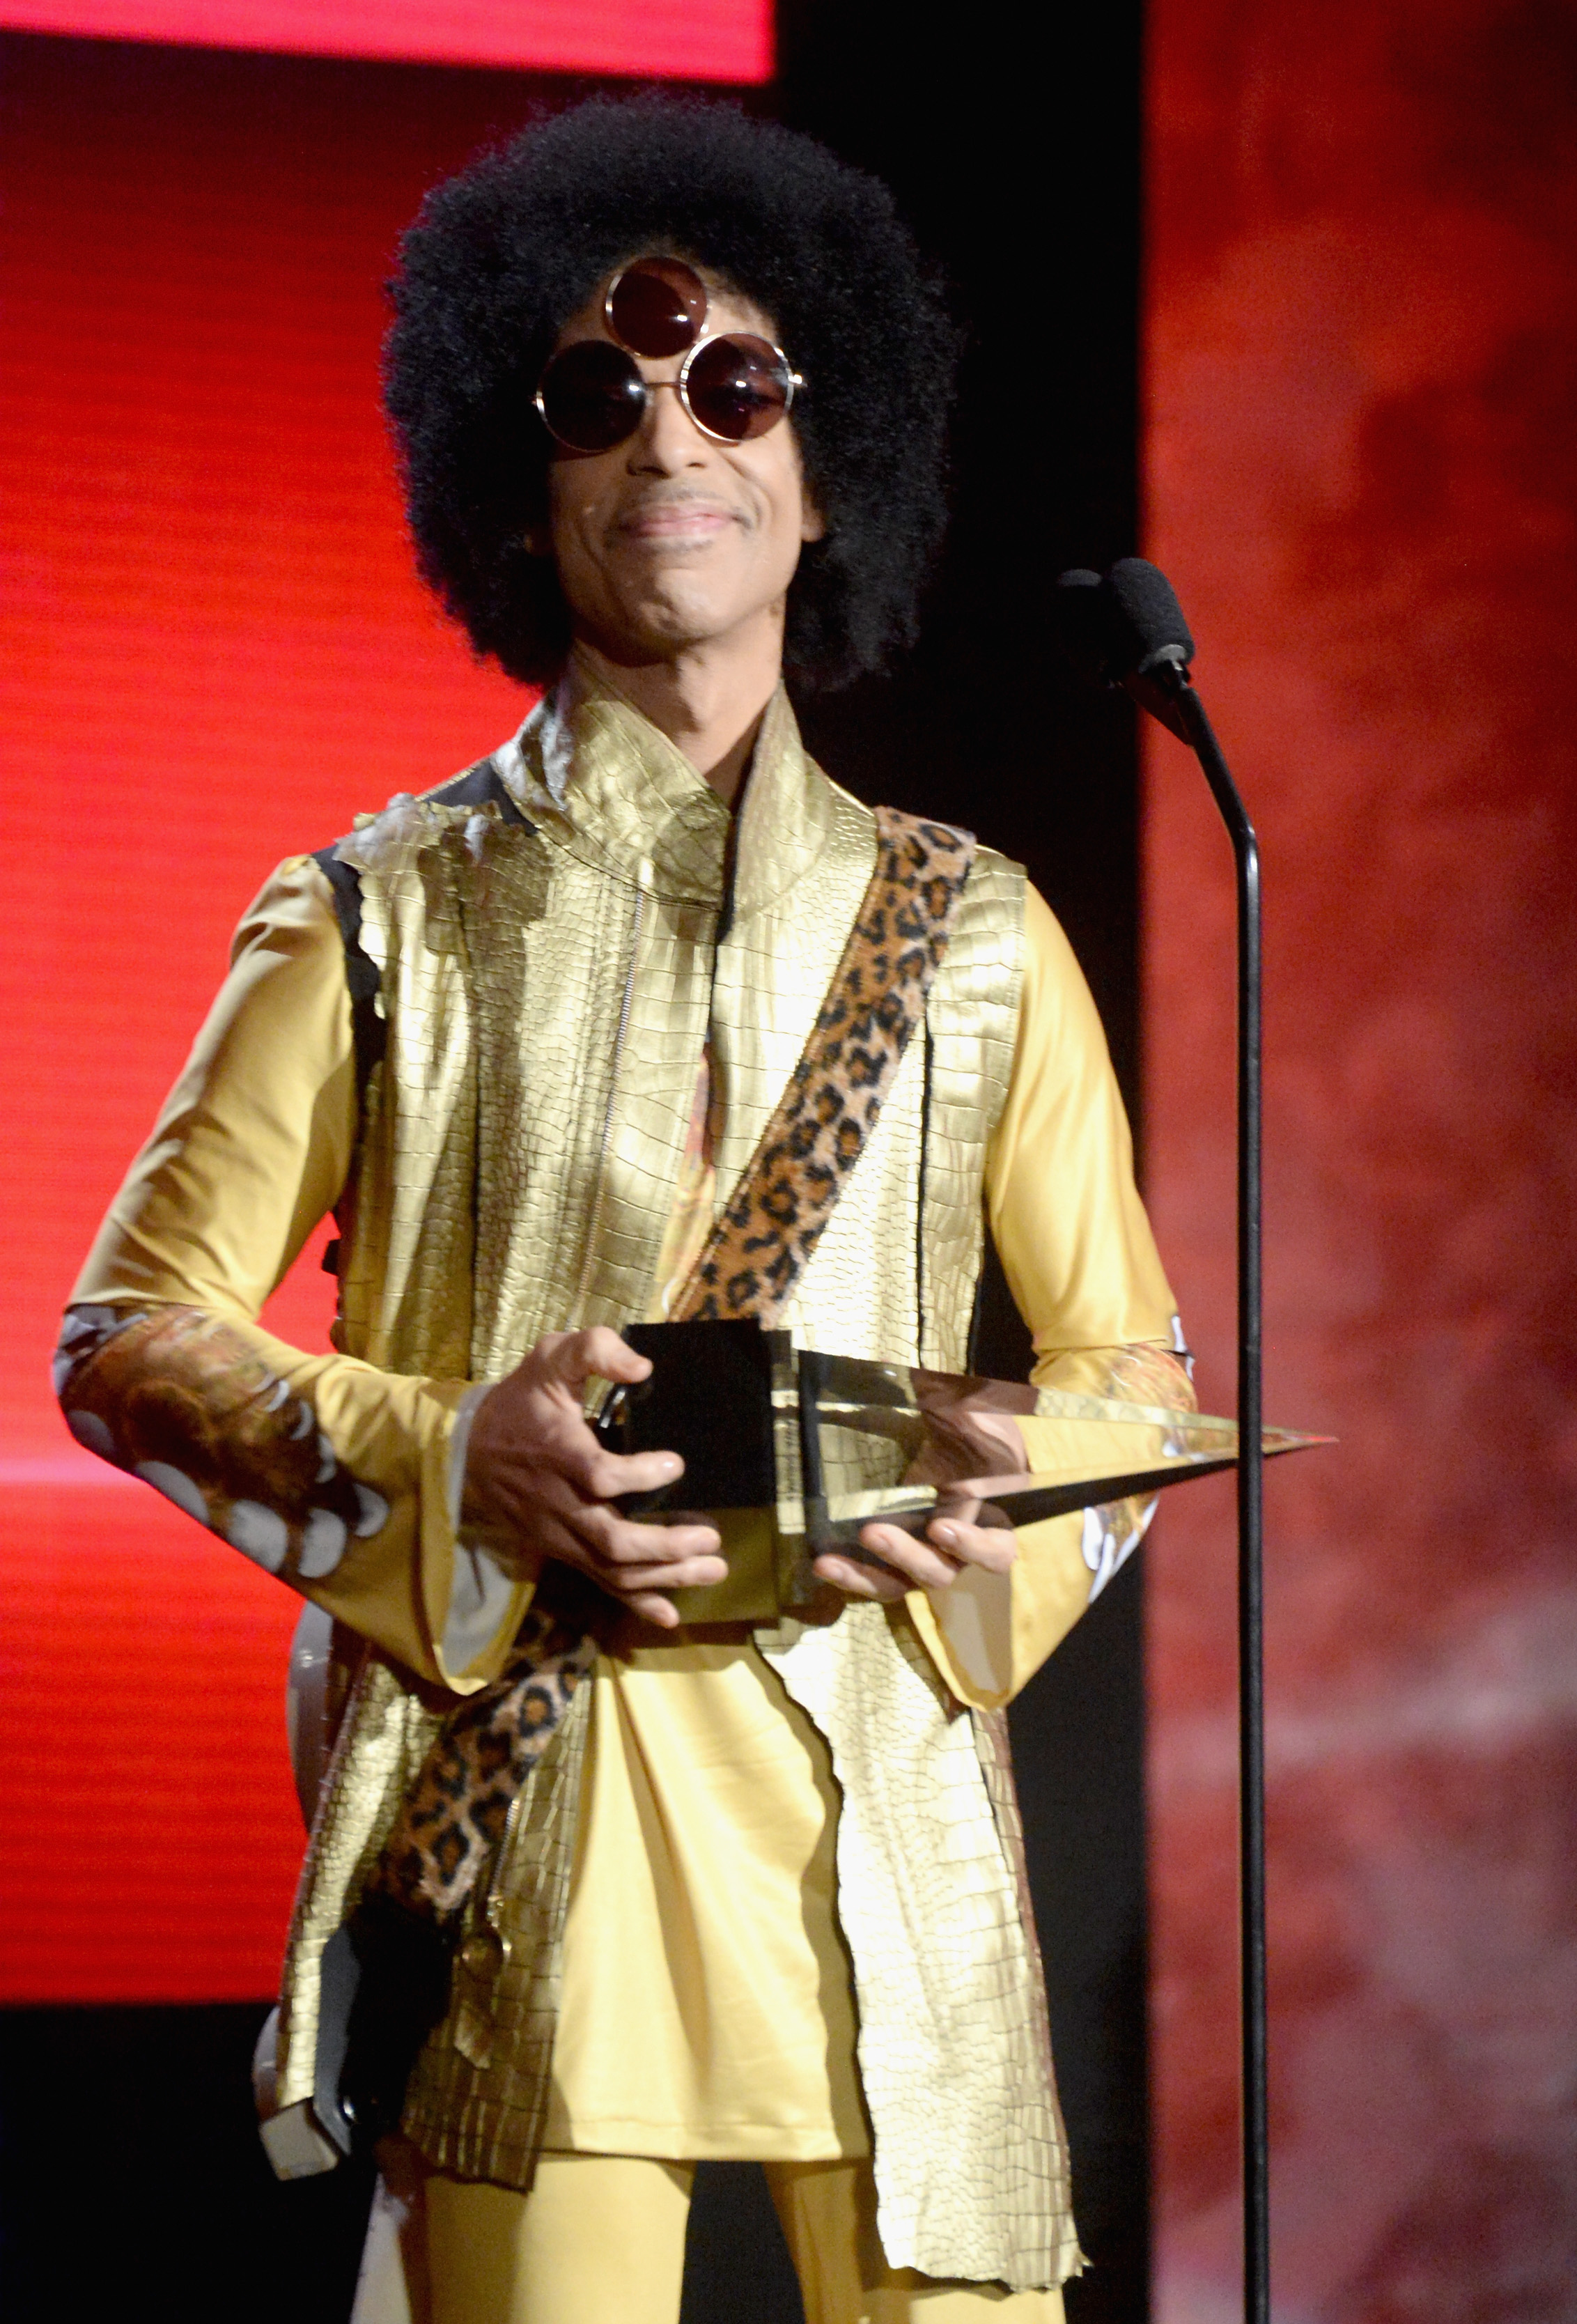 Prince during the 2015 American Music Awards on Nov. 22, 2015 in Los Angeles.